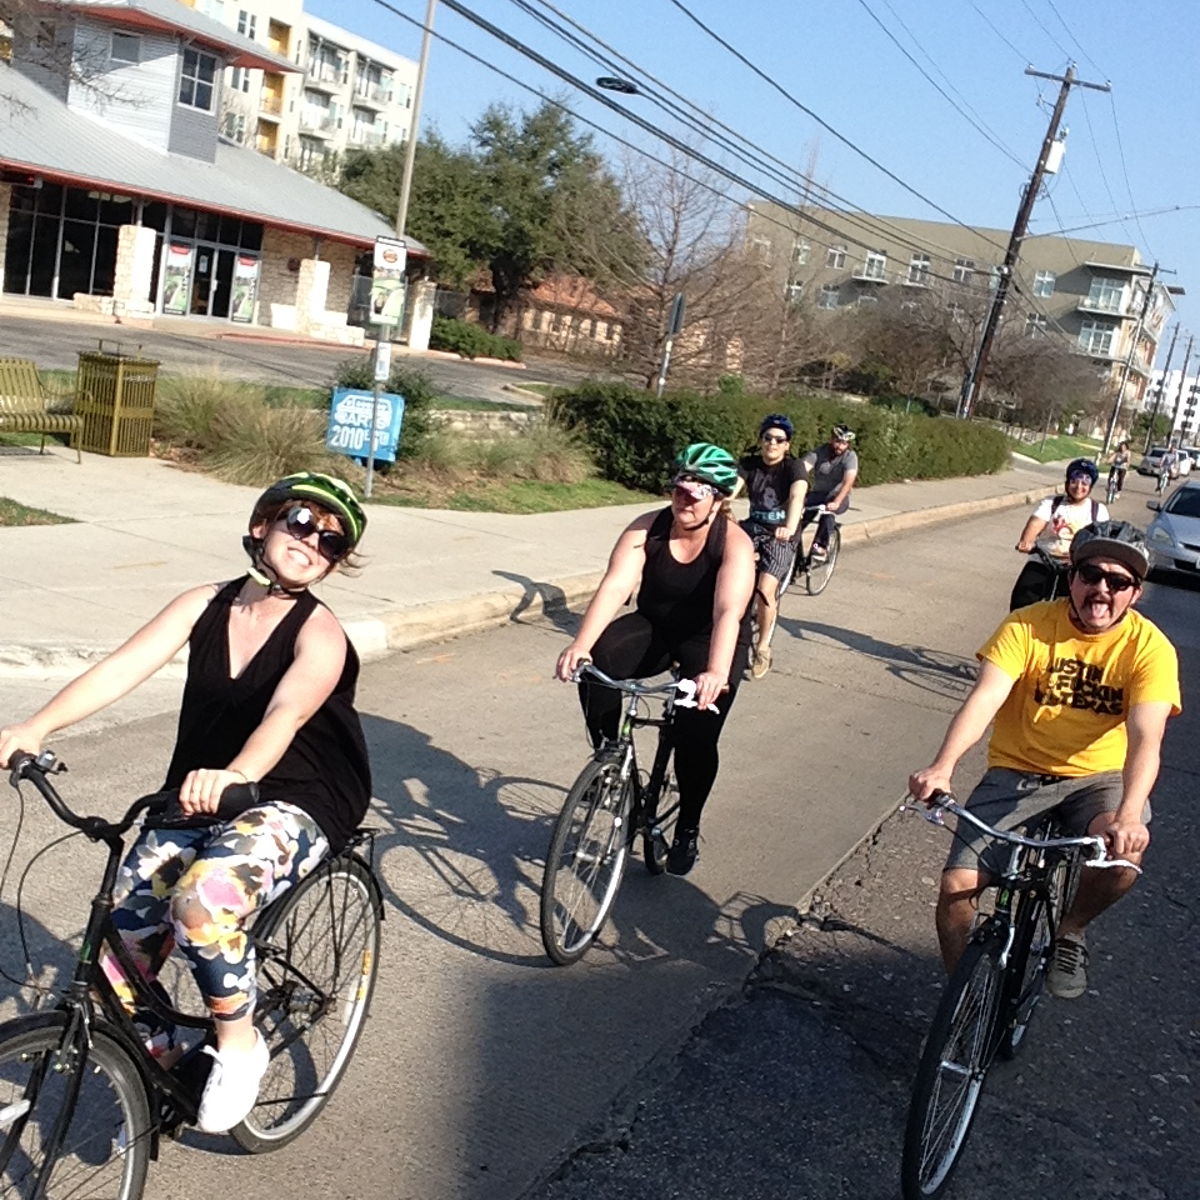 Austin Beer and City Sites by Bike Tour